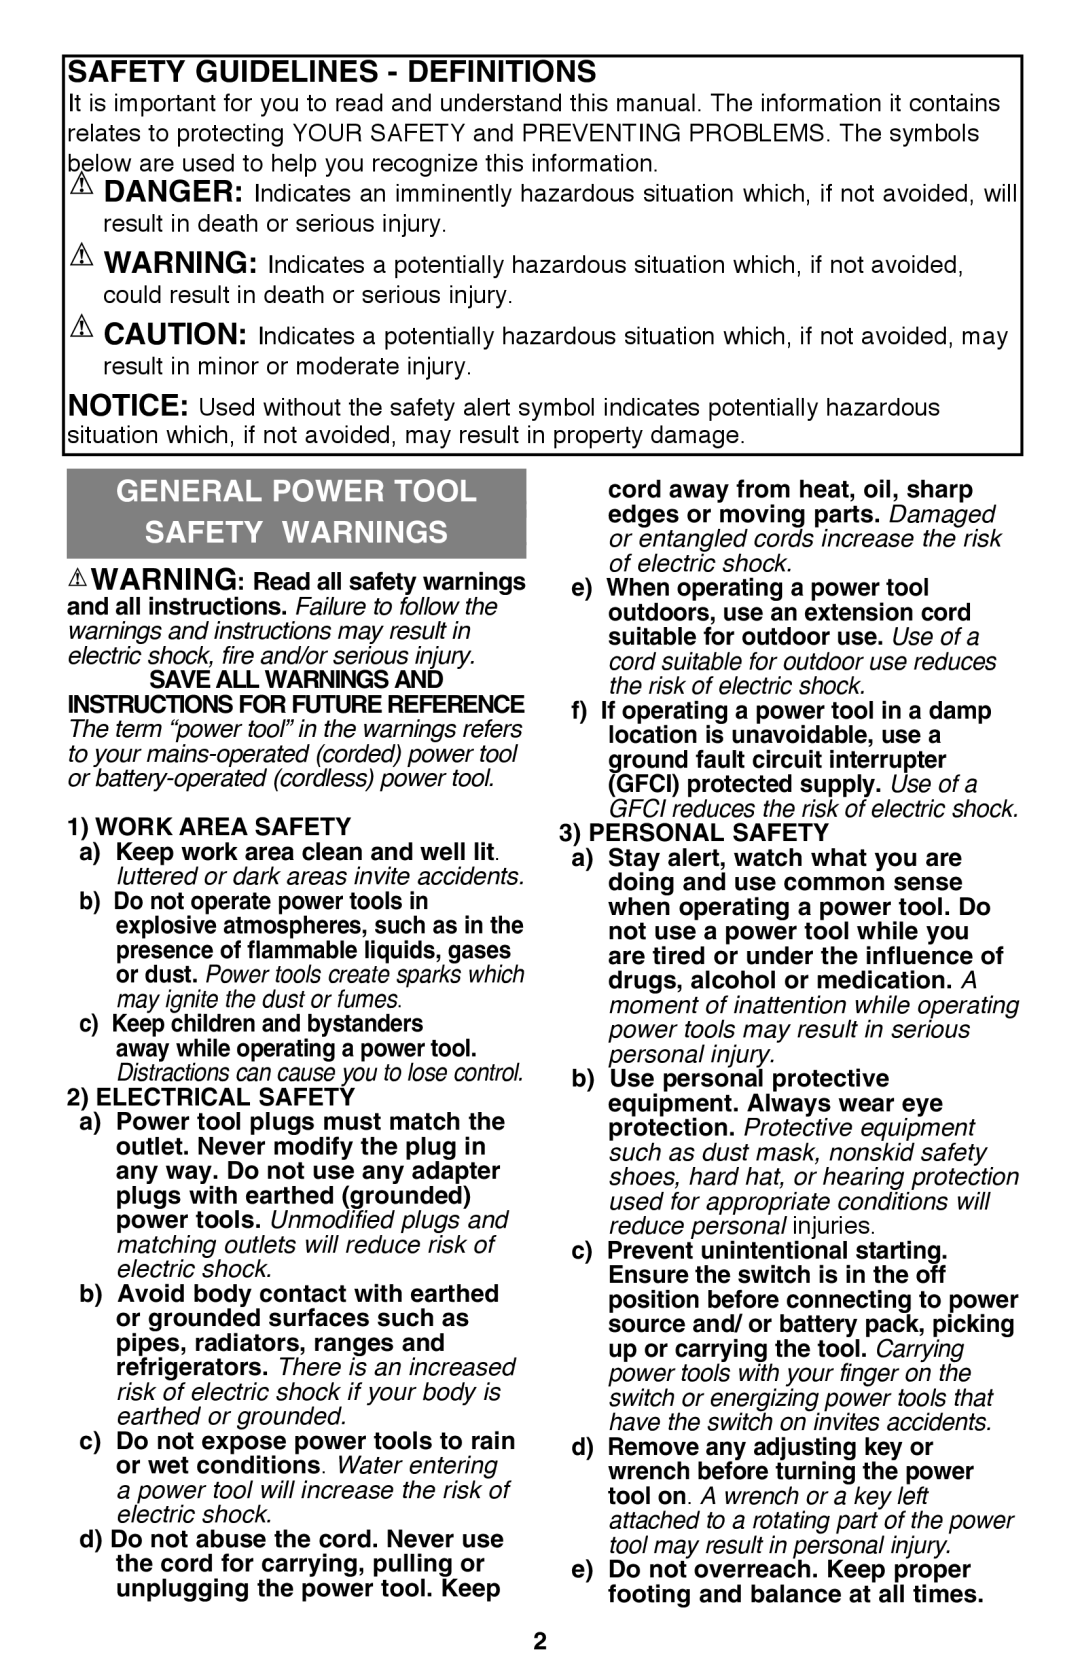 Black & Decker CS1015 Safety Guidelines - Definitions, General Power tool safety warnings, Save all warnings and 